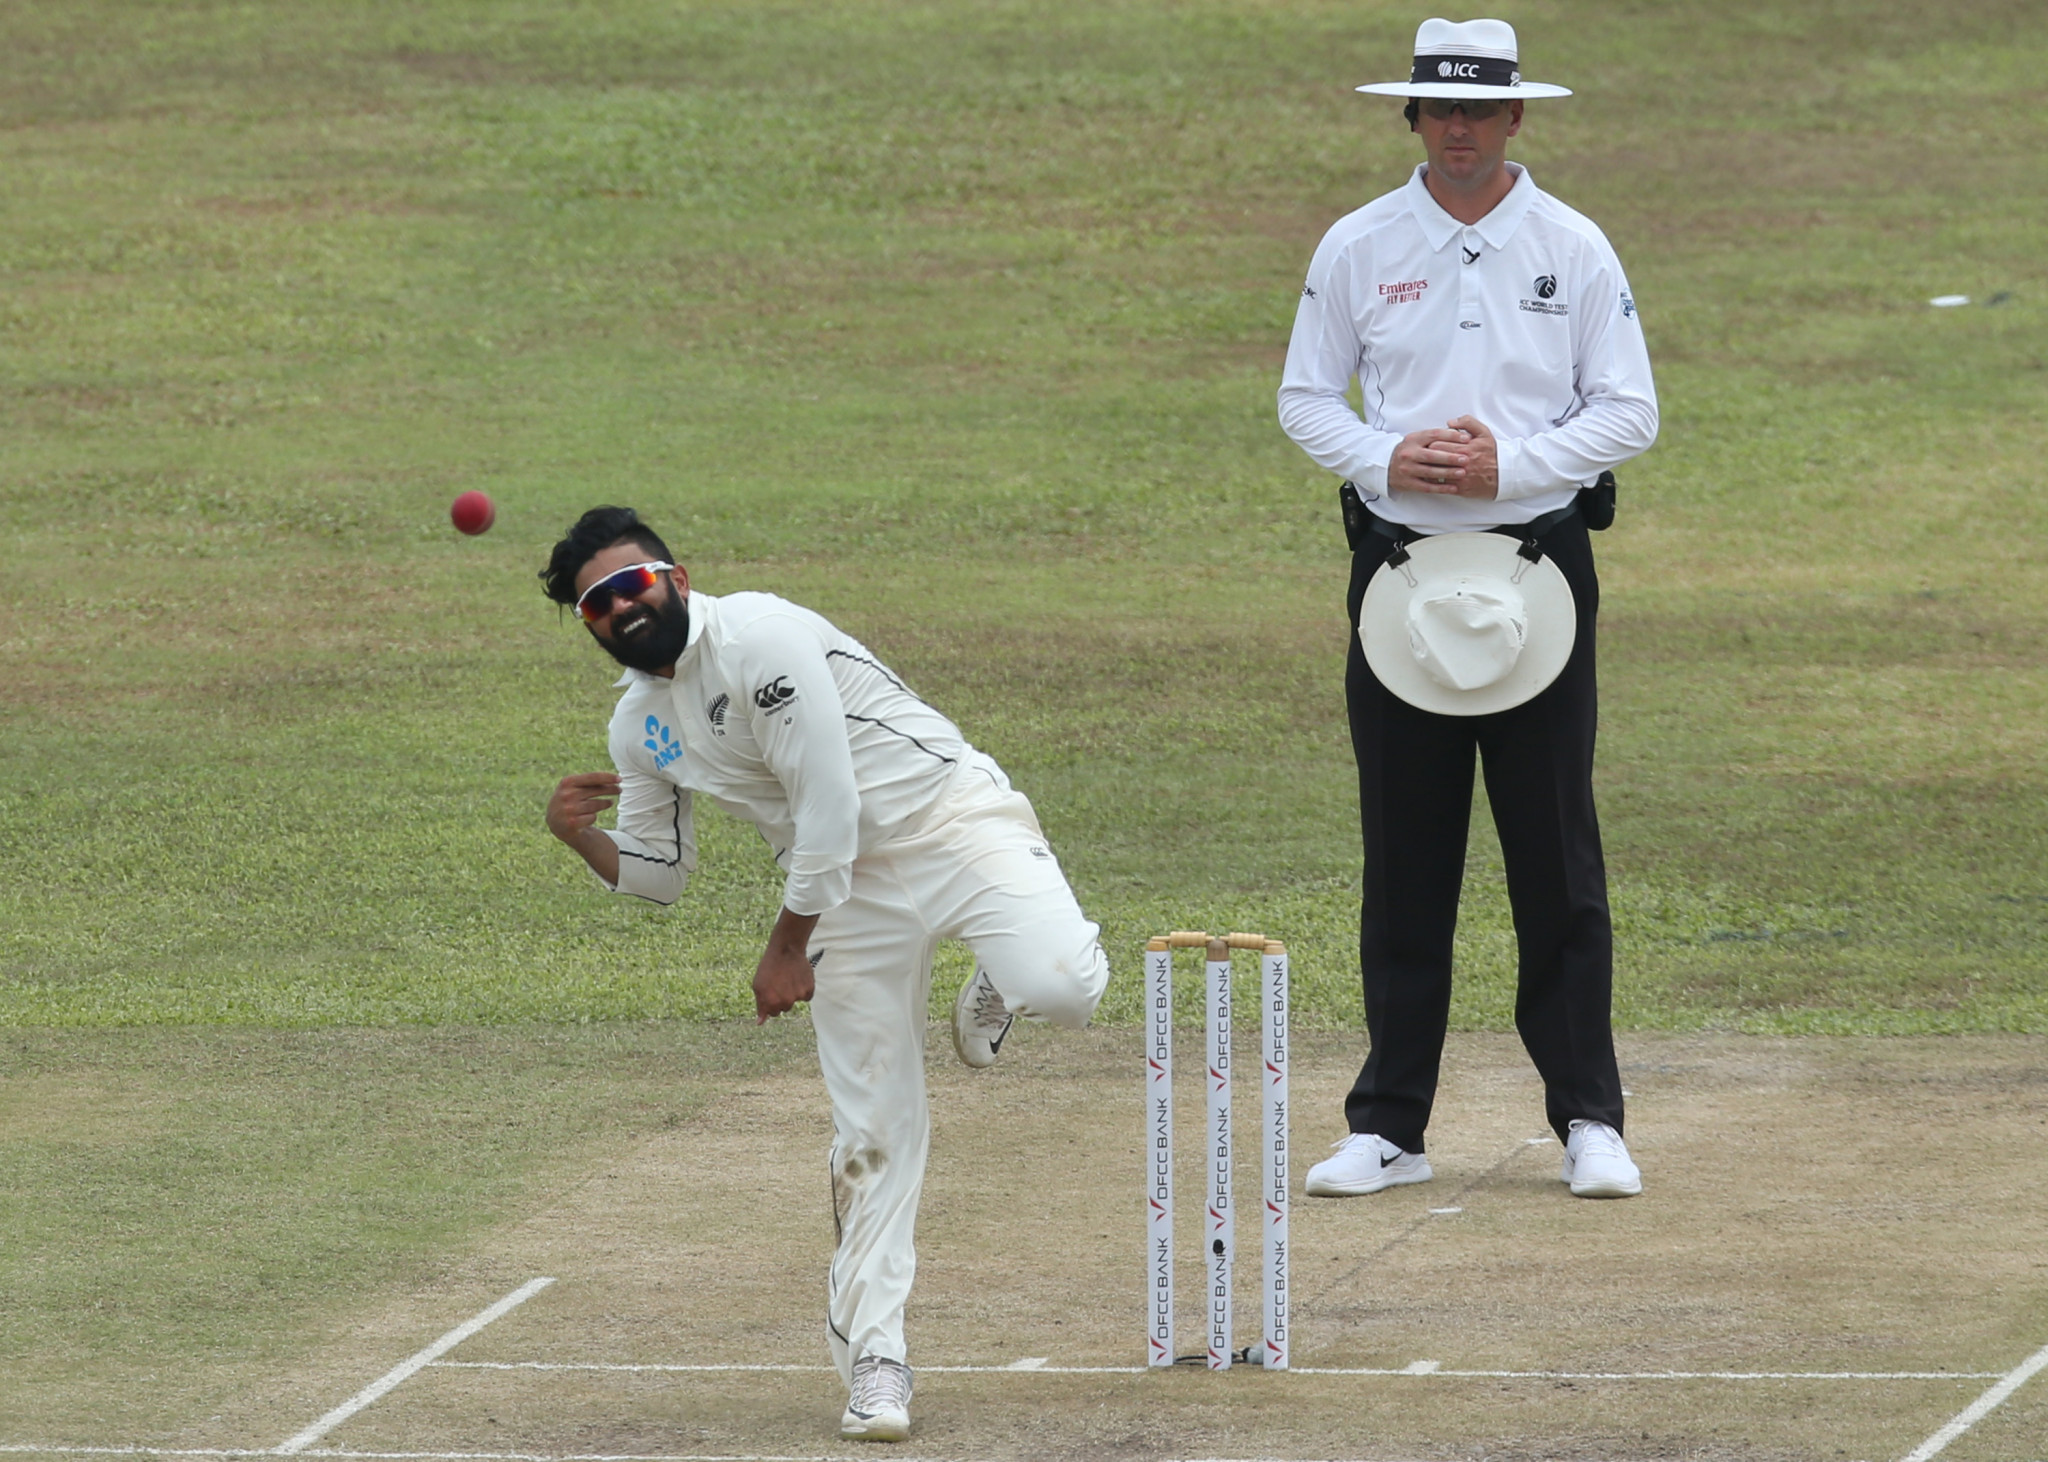 Ajaz Patel took 10 wickets in an innings against India in Mumbai ©Getty Images